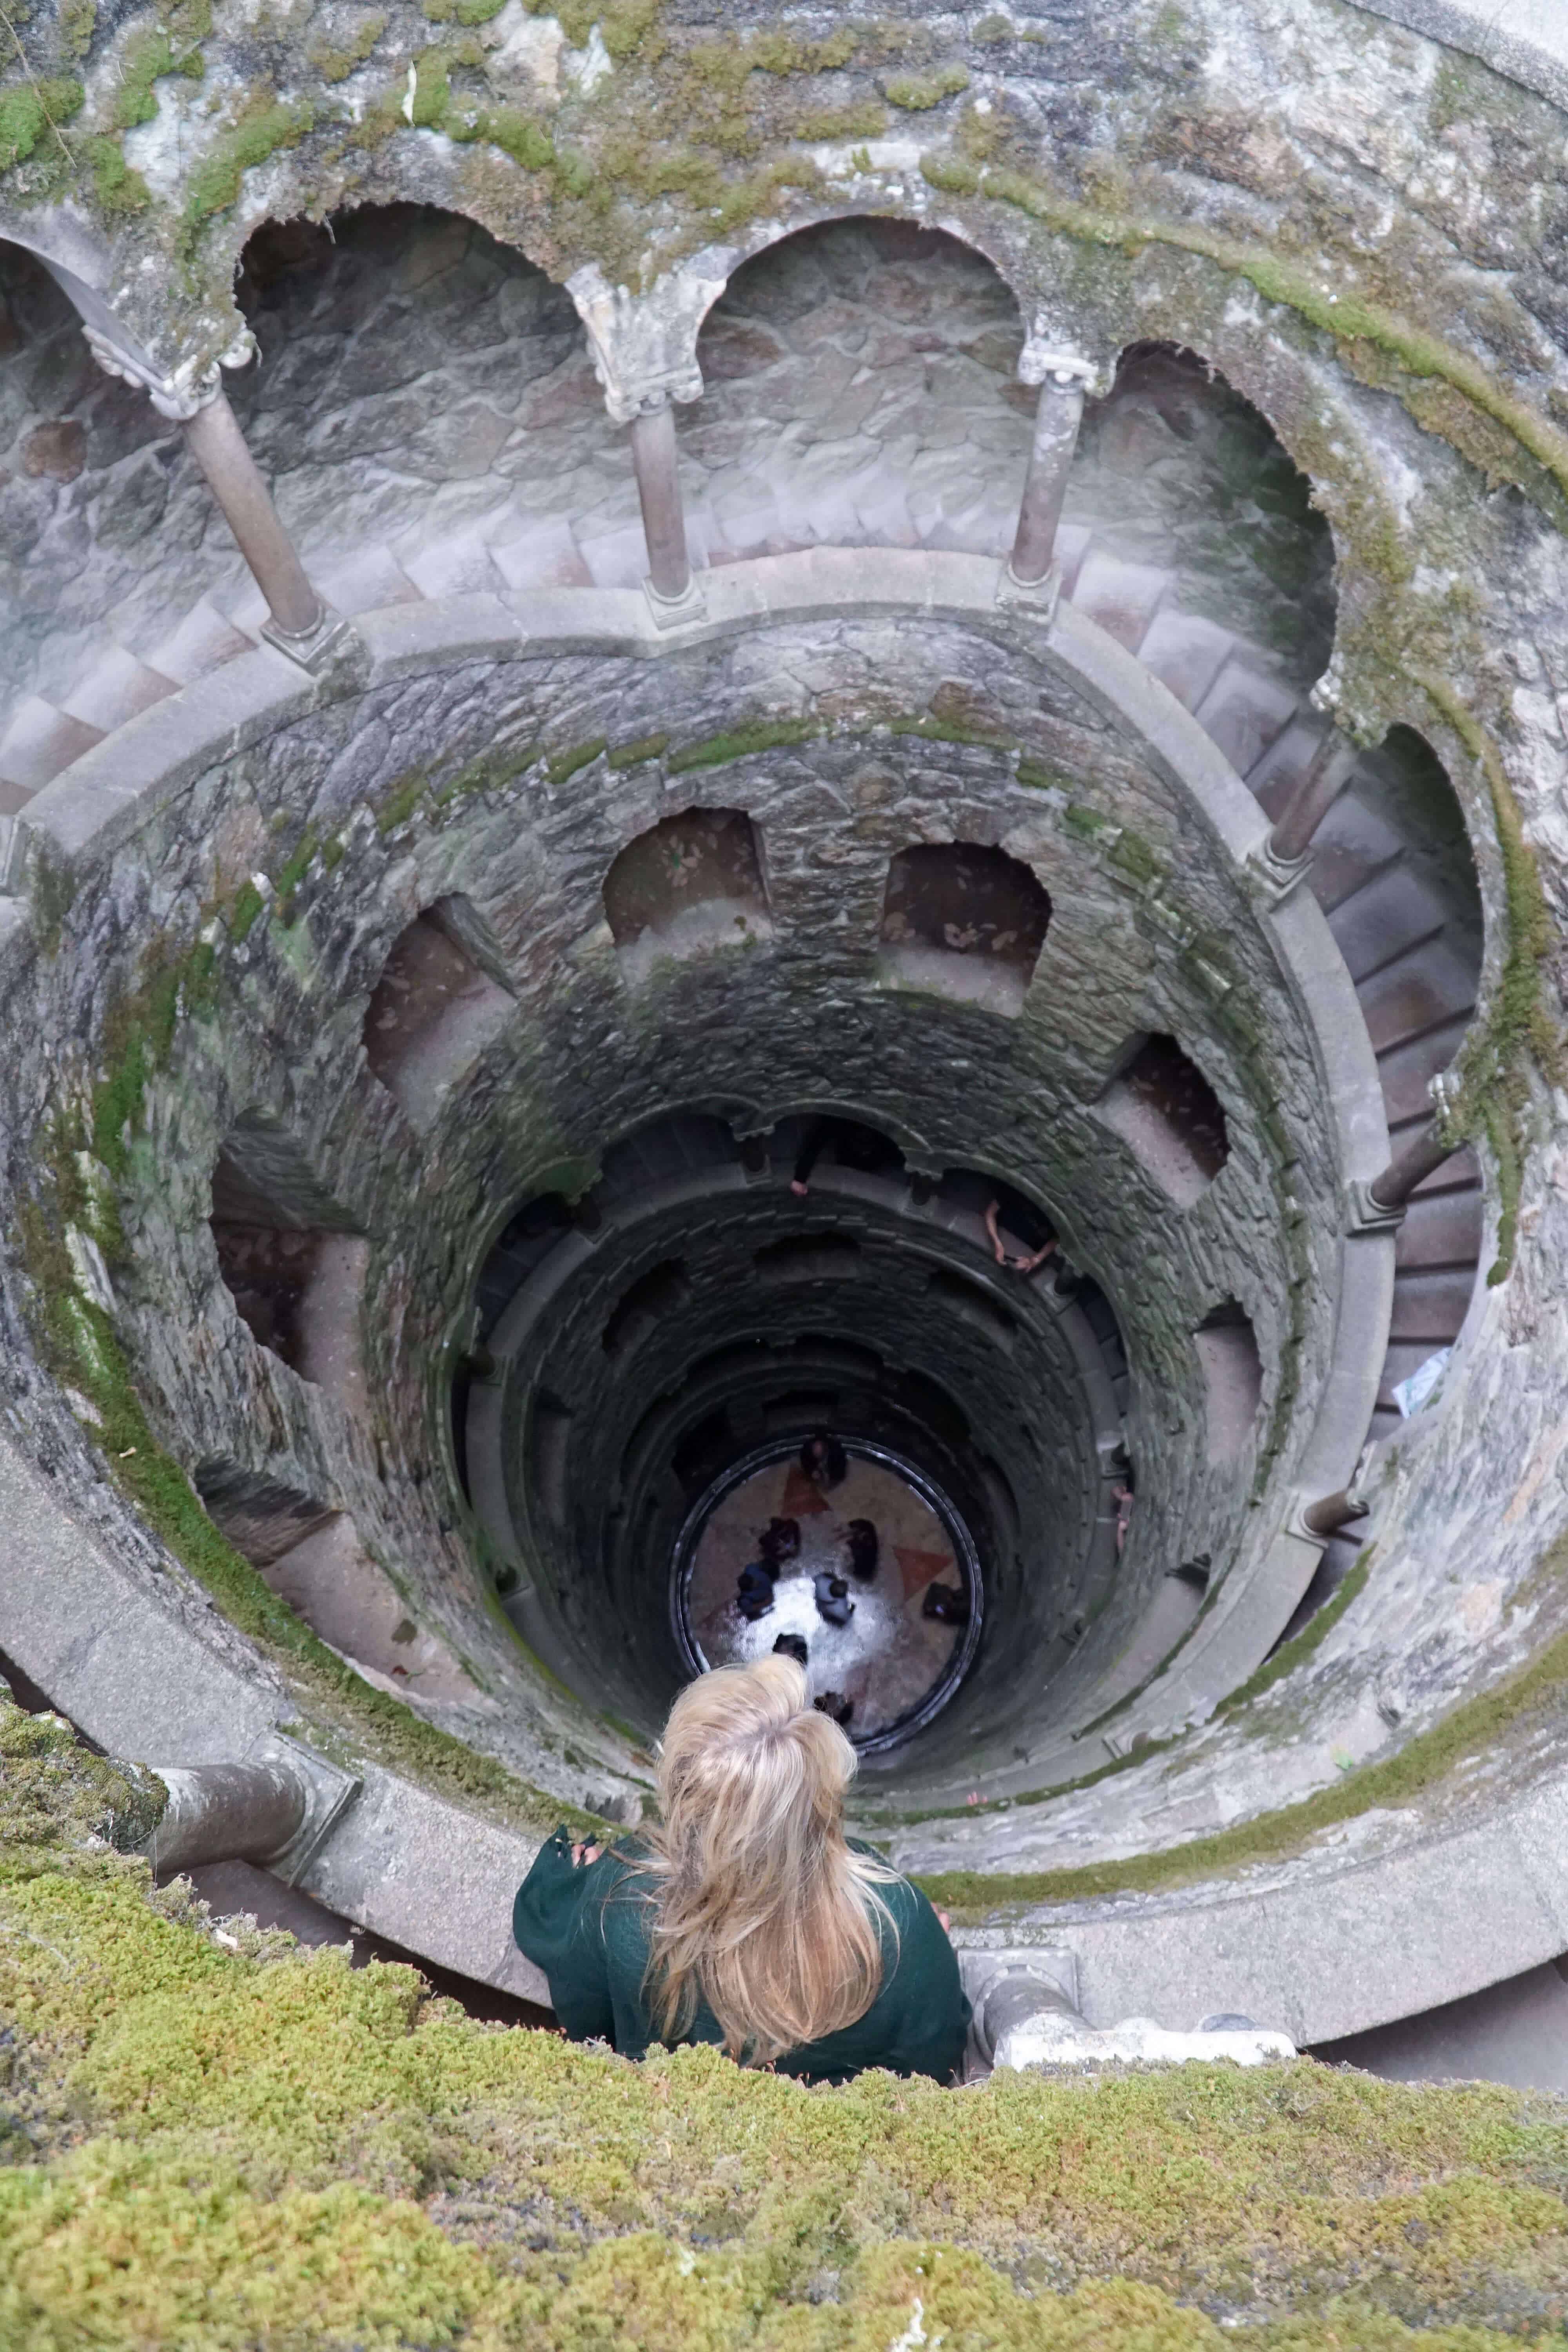 Top Three Places to See in Sintra Portugal | Quinta da Regaleira | The Republic of Rose